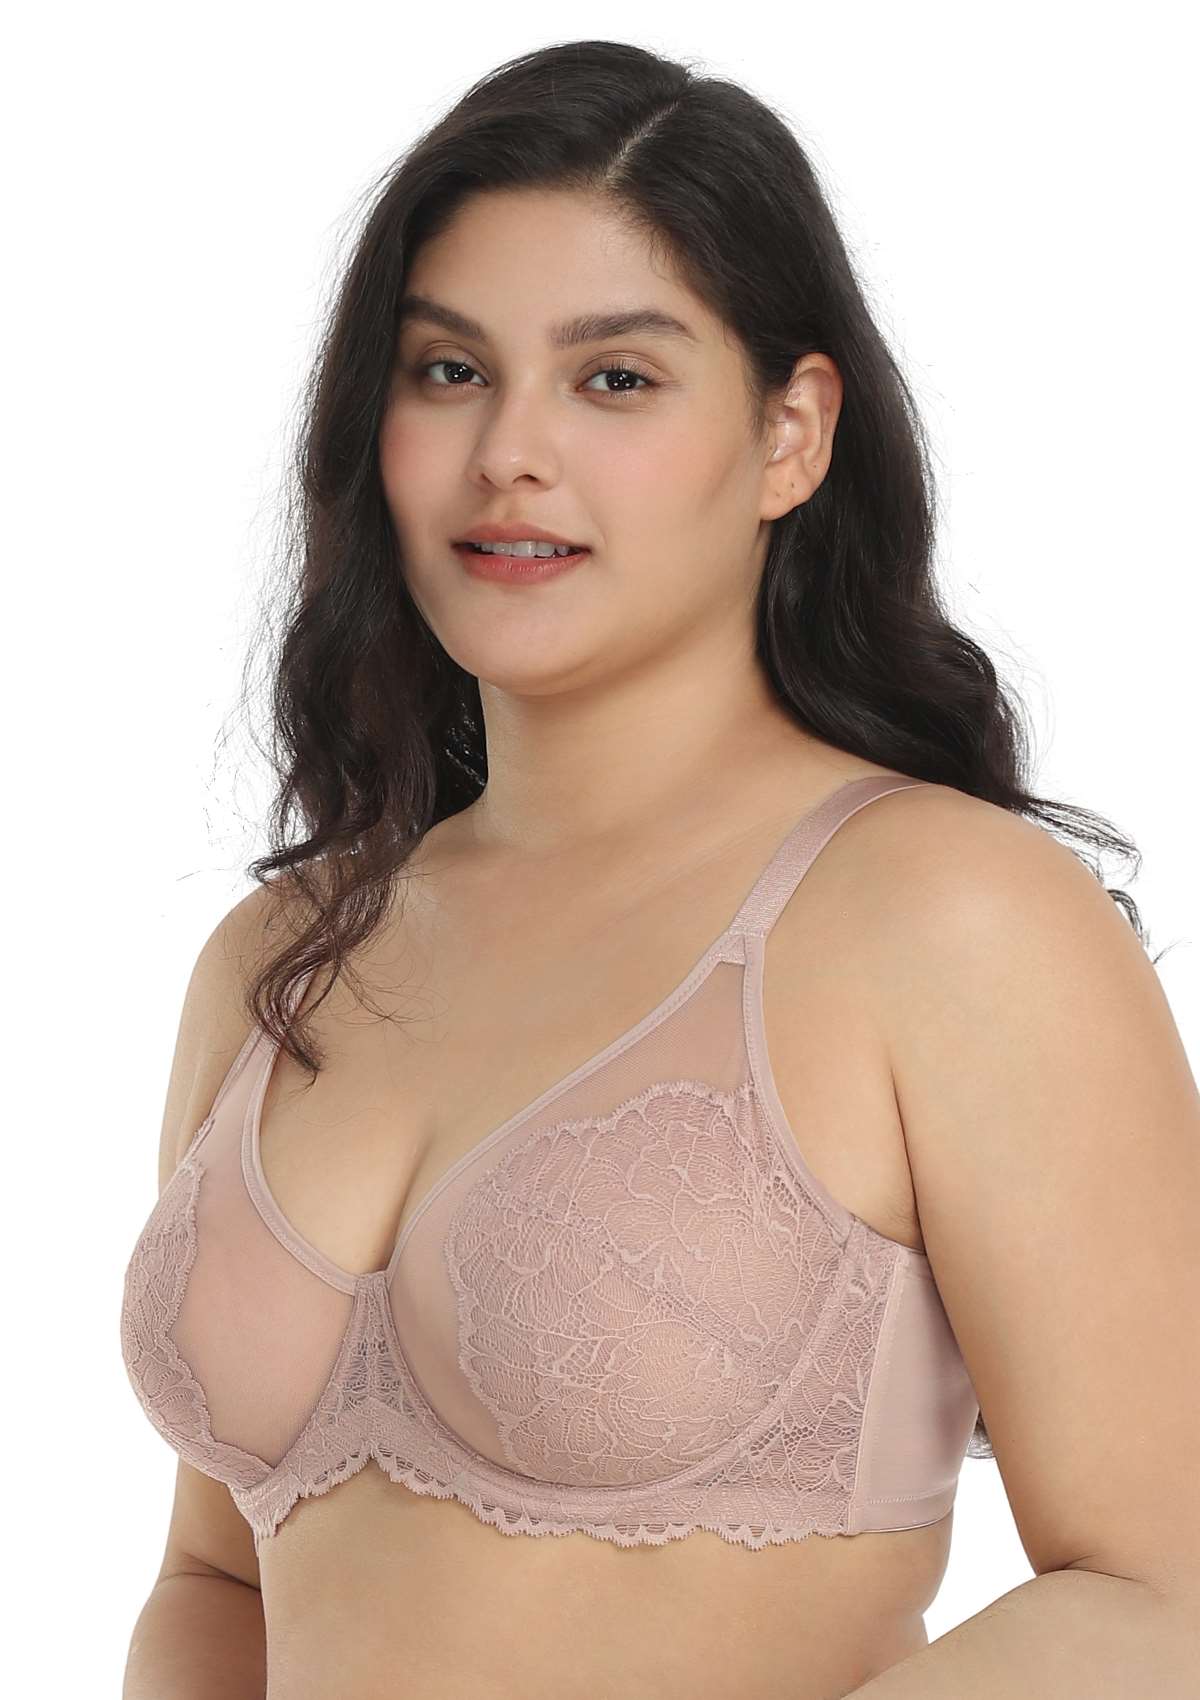 HSIA Blossom Lace Bra And Panties Set: Best Bra For Large Busts - Dark Pink / 40 / C